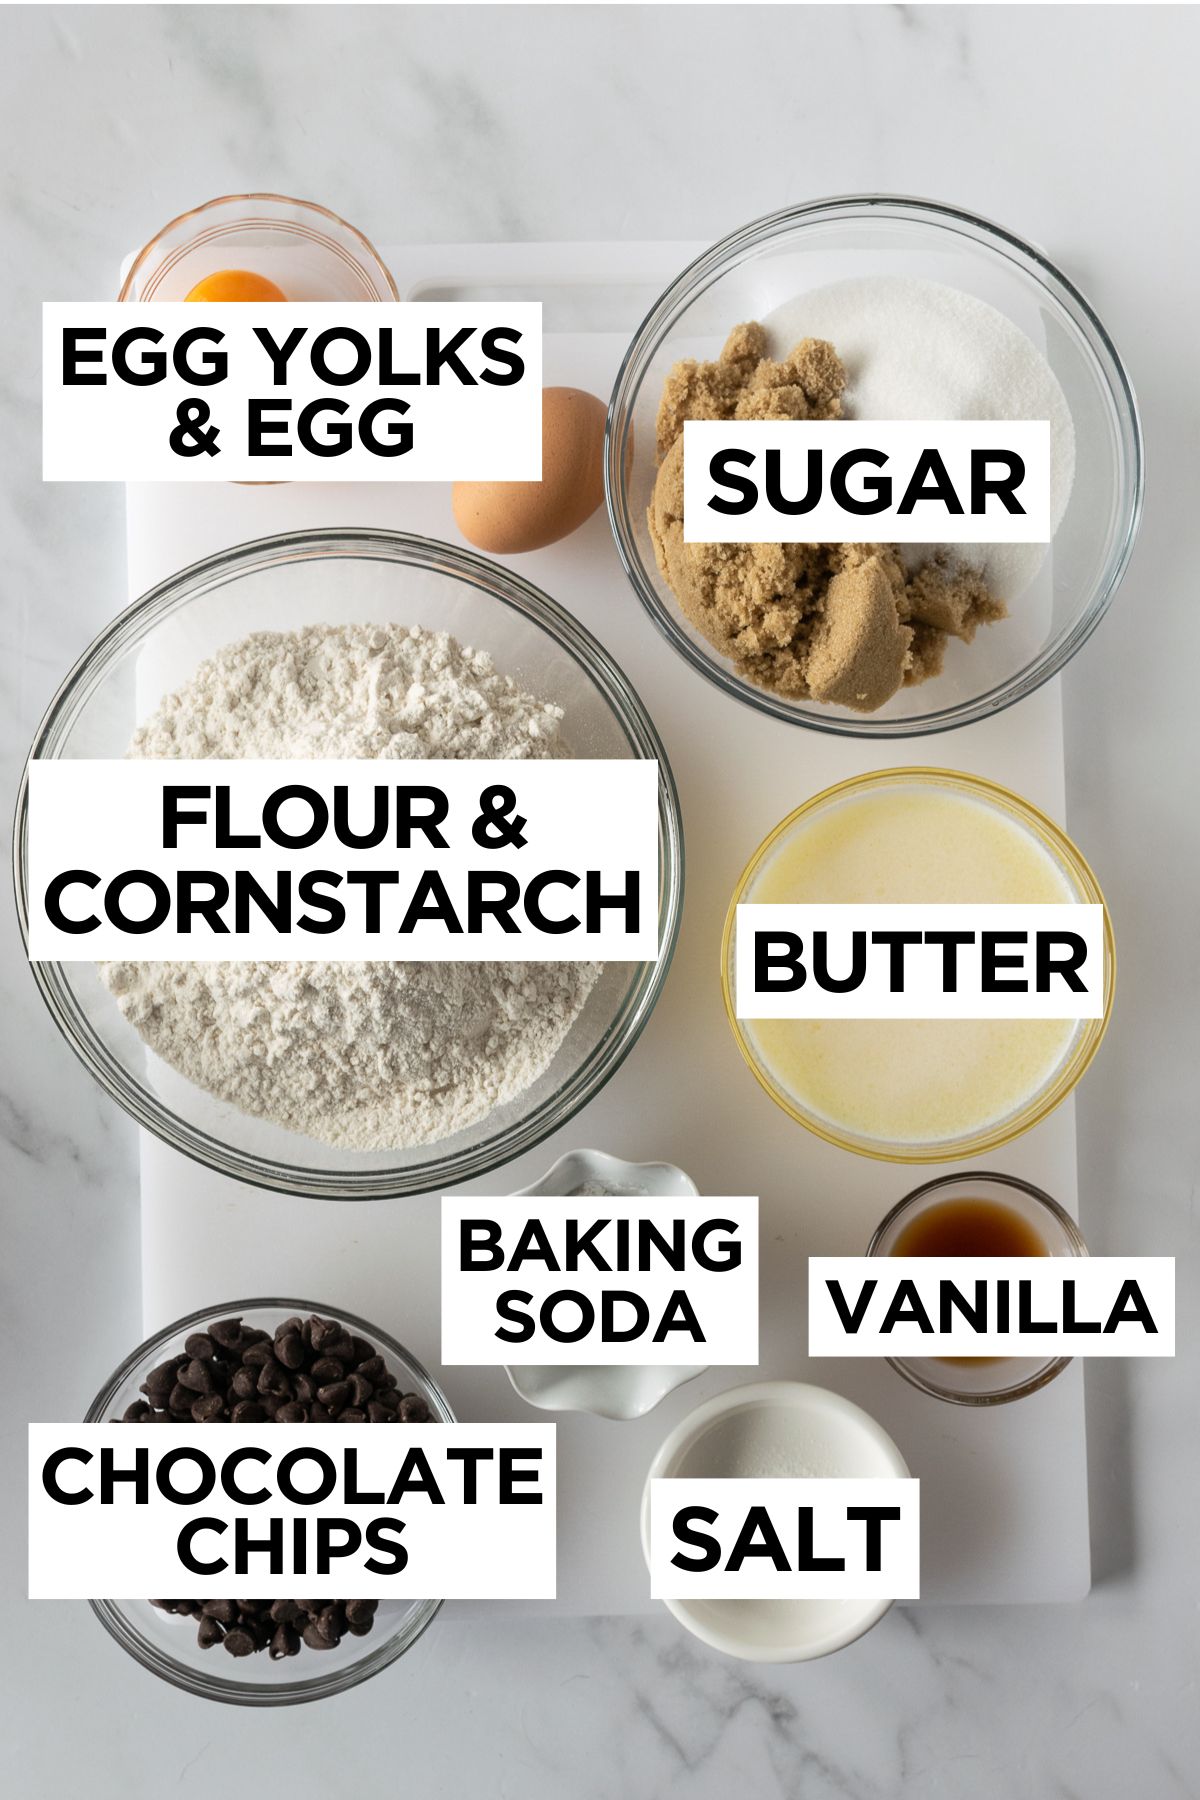 ingredients for chewy chocolate chip cookies such as egg, egg yolks, sugar, flour, cornstarch, butter, baking soda, chocolate, vanilla and salt.